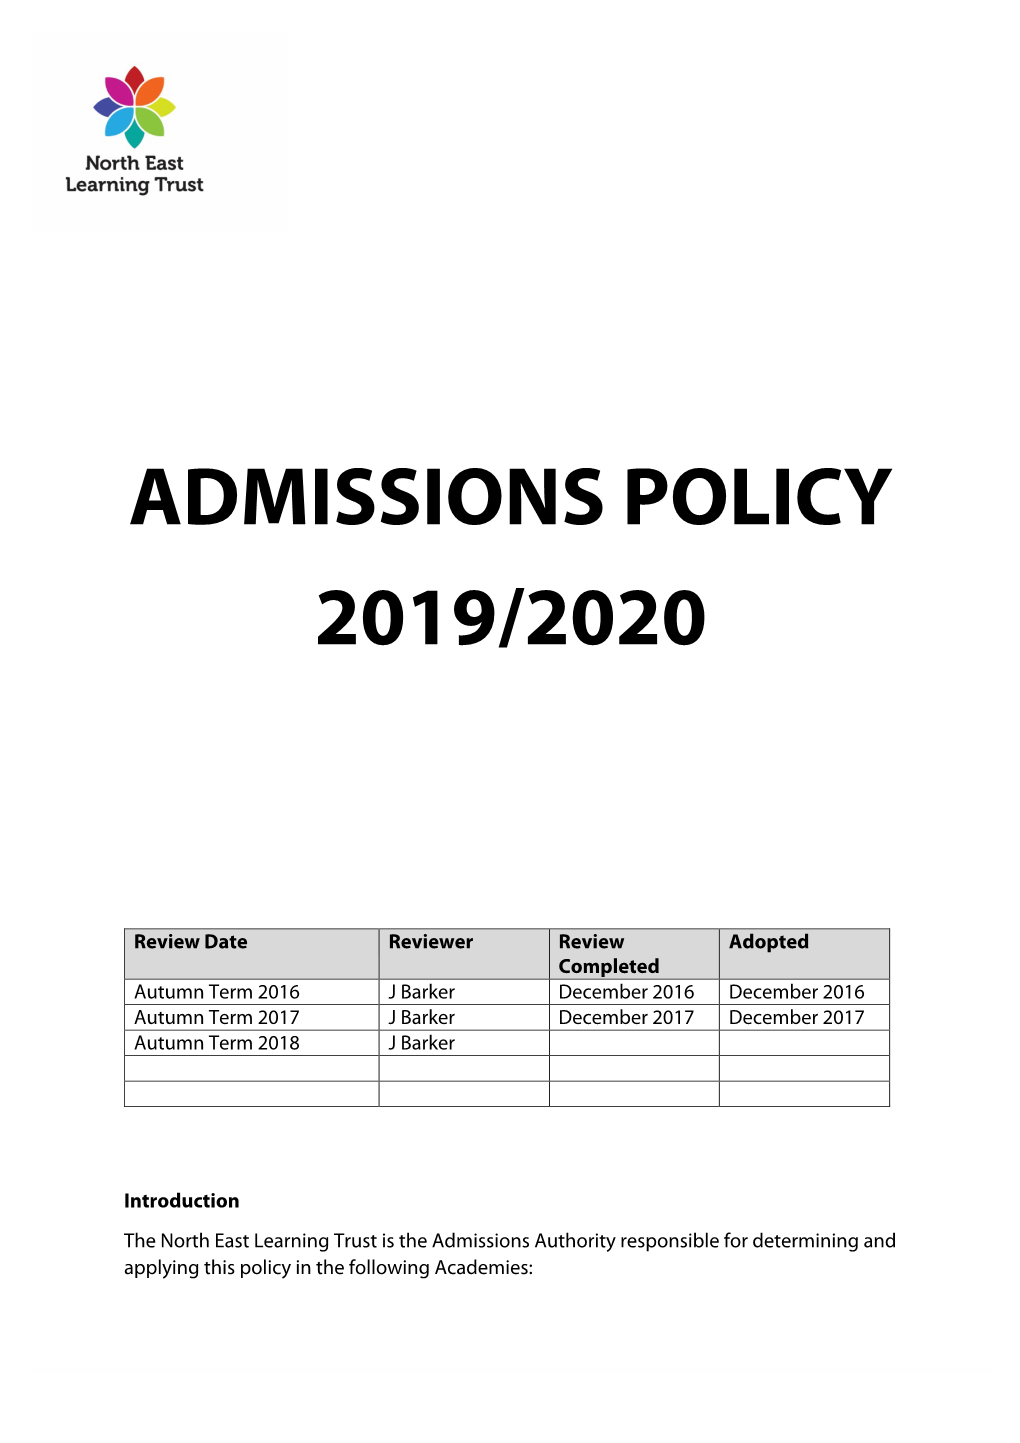 Admissions Policy 2019/2020